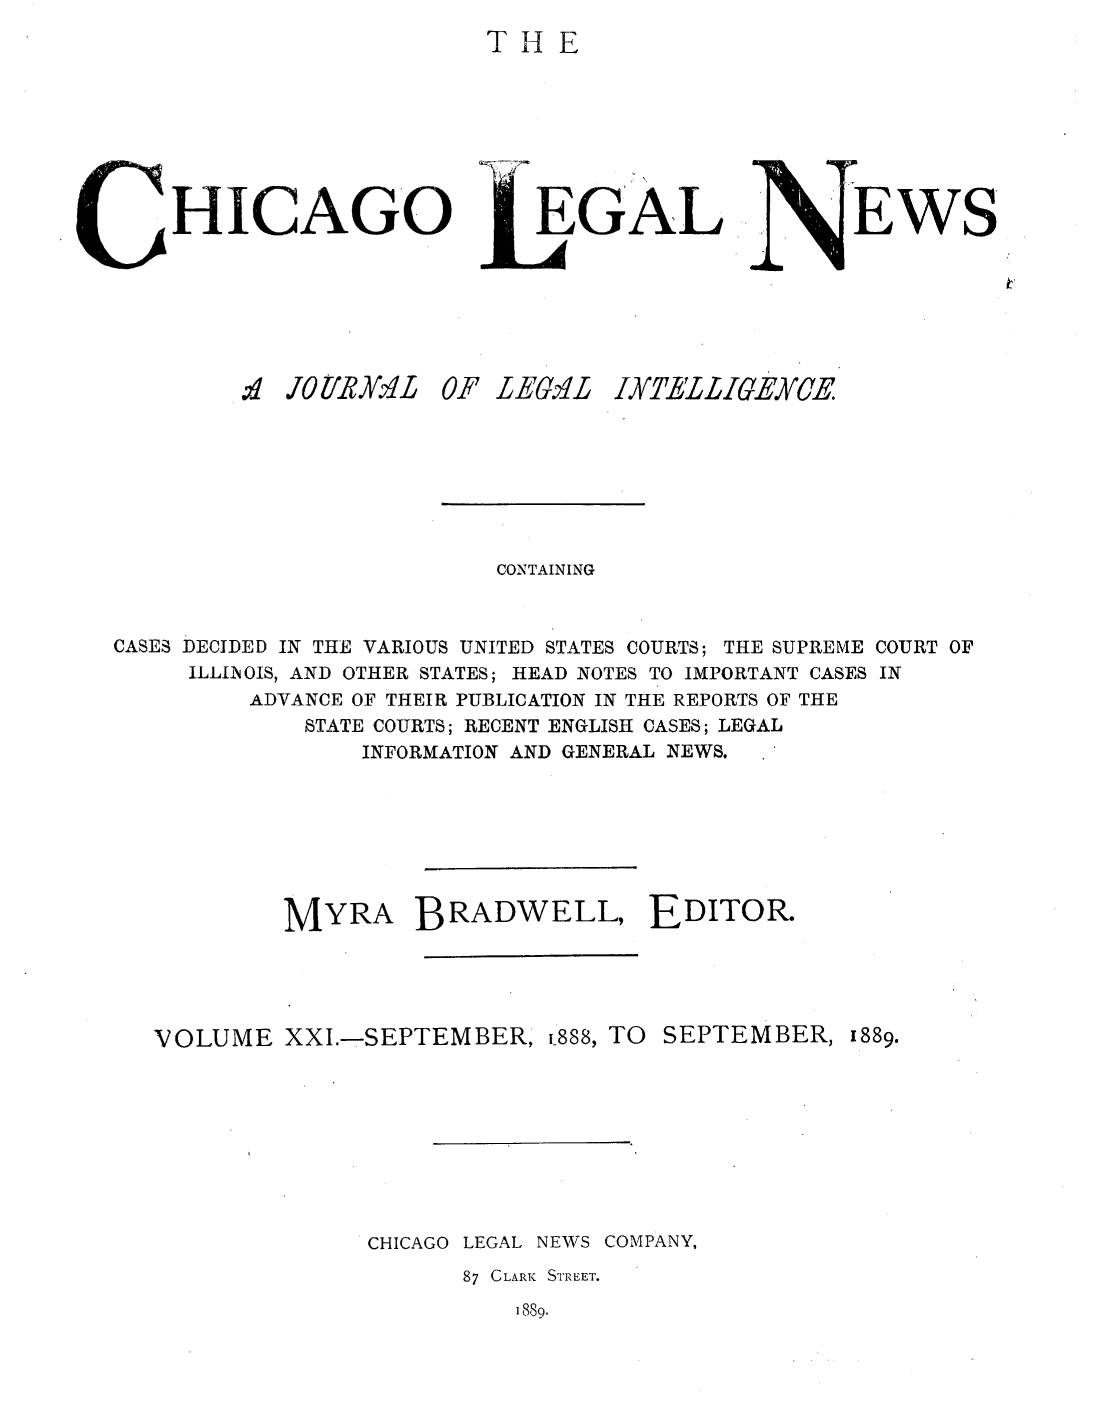 handle is hein.journals/chiclene21 and id is 1 raw text is: THEHICAGOd JO6/XRA/:L£ 6EGALF LEGQLEWSCONTAININGCASES DECIDED IN THE VARIOUS UNITED STATES COURTS; THE SUPREME COURT OFILLINOIS, AND OTHER STATES; HEAD NOTES TO IMPORTANT CASES INADVANCE OF THEIR PUBLICATION IN THE REPORTS OF THESTATE COURTS; RECENT ENGLISH CASES; LEGALINFORMATION AND GENERAL NEWS.MYRA BRADWELL, EDITOR.VOLUME XXI.-SEPTEMBER, p888, TO SEPTEMBER,1889.CHICAGO LEGAL NEWSCOMPANY,87 CLARK STREET.1889.IXTELIEXUCE